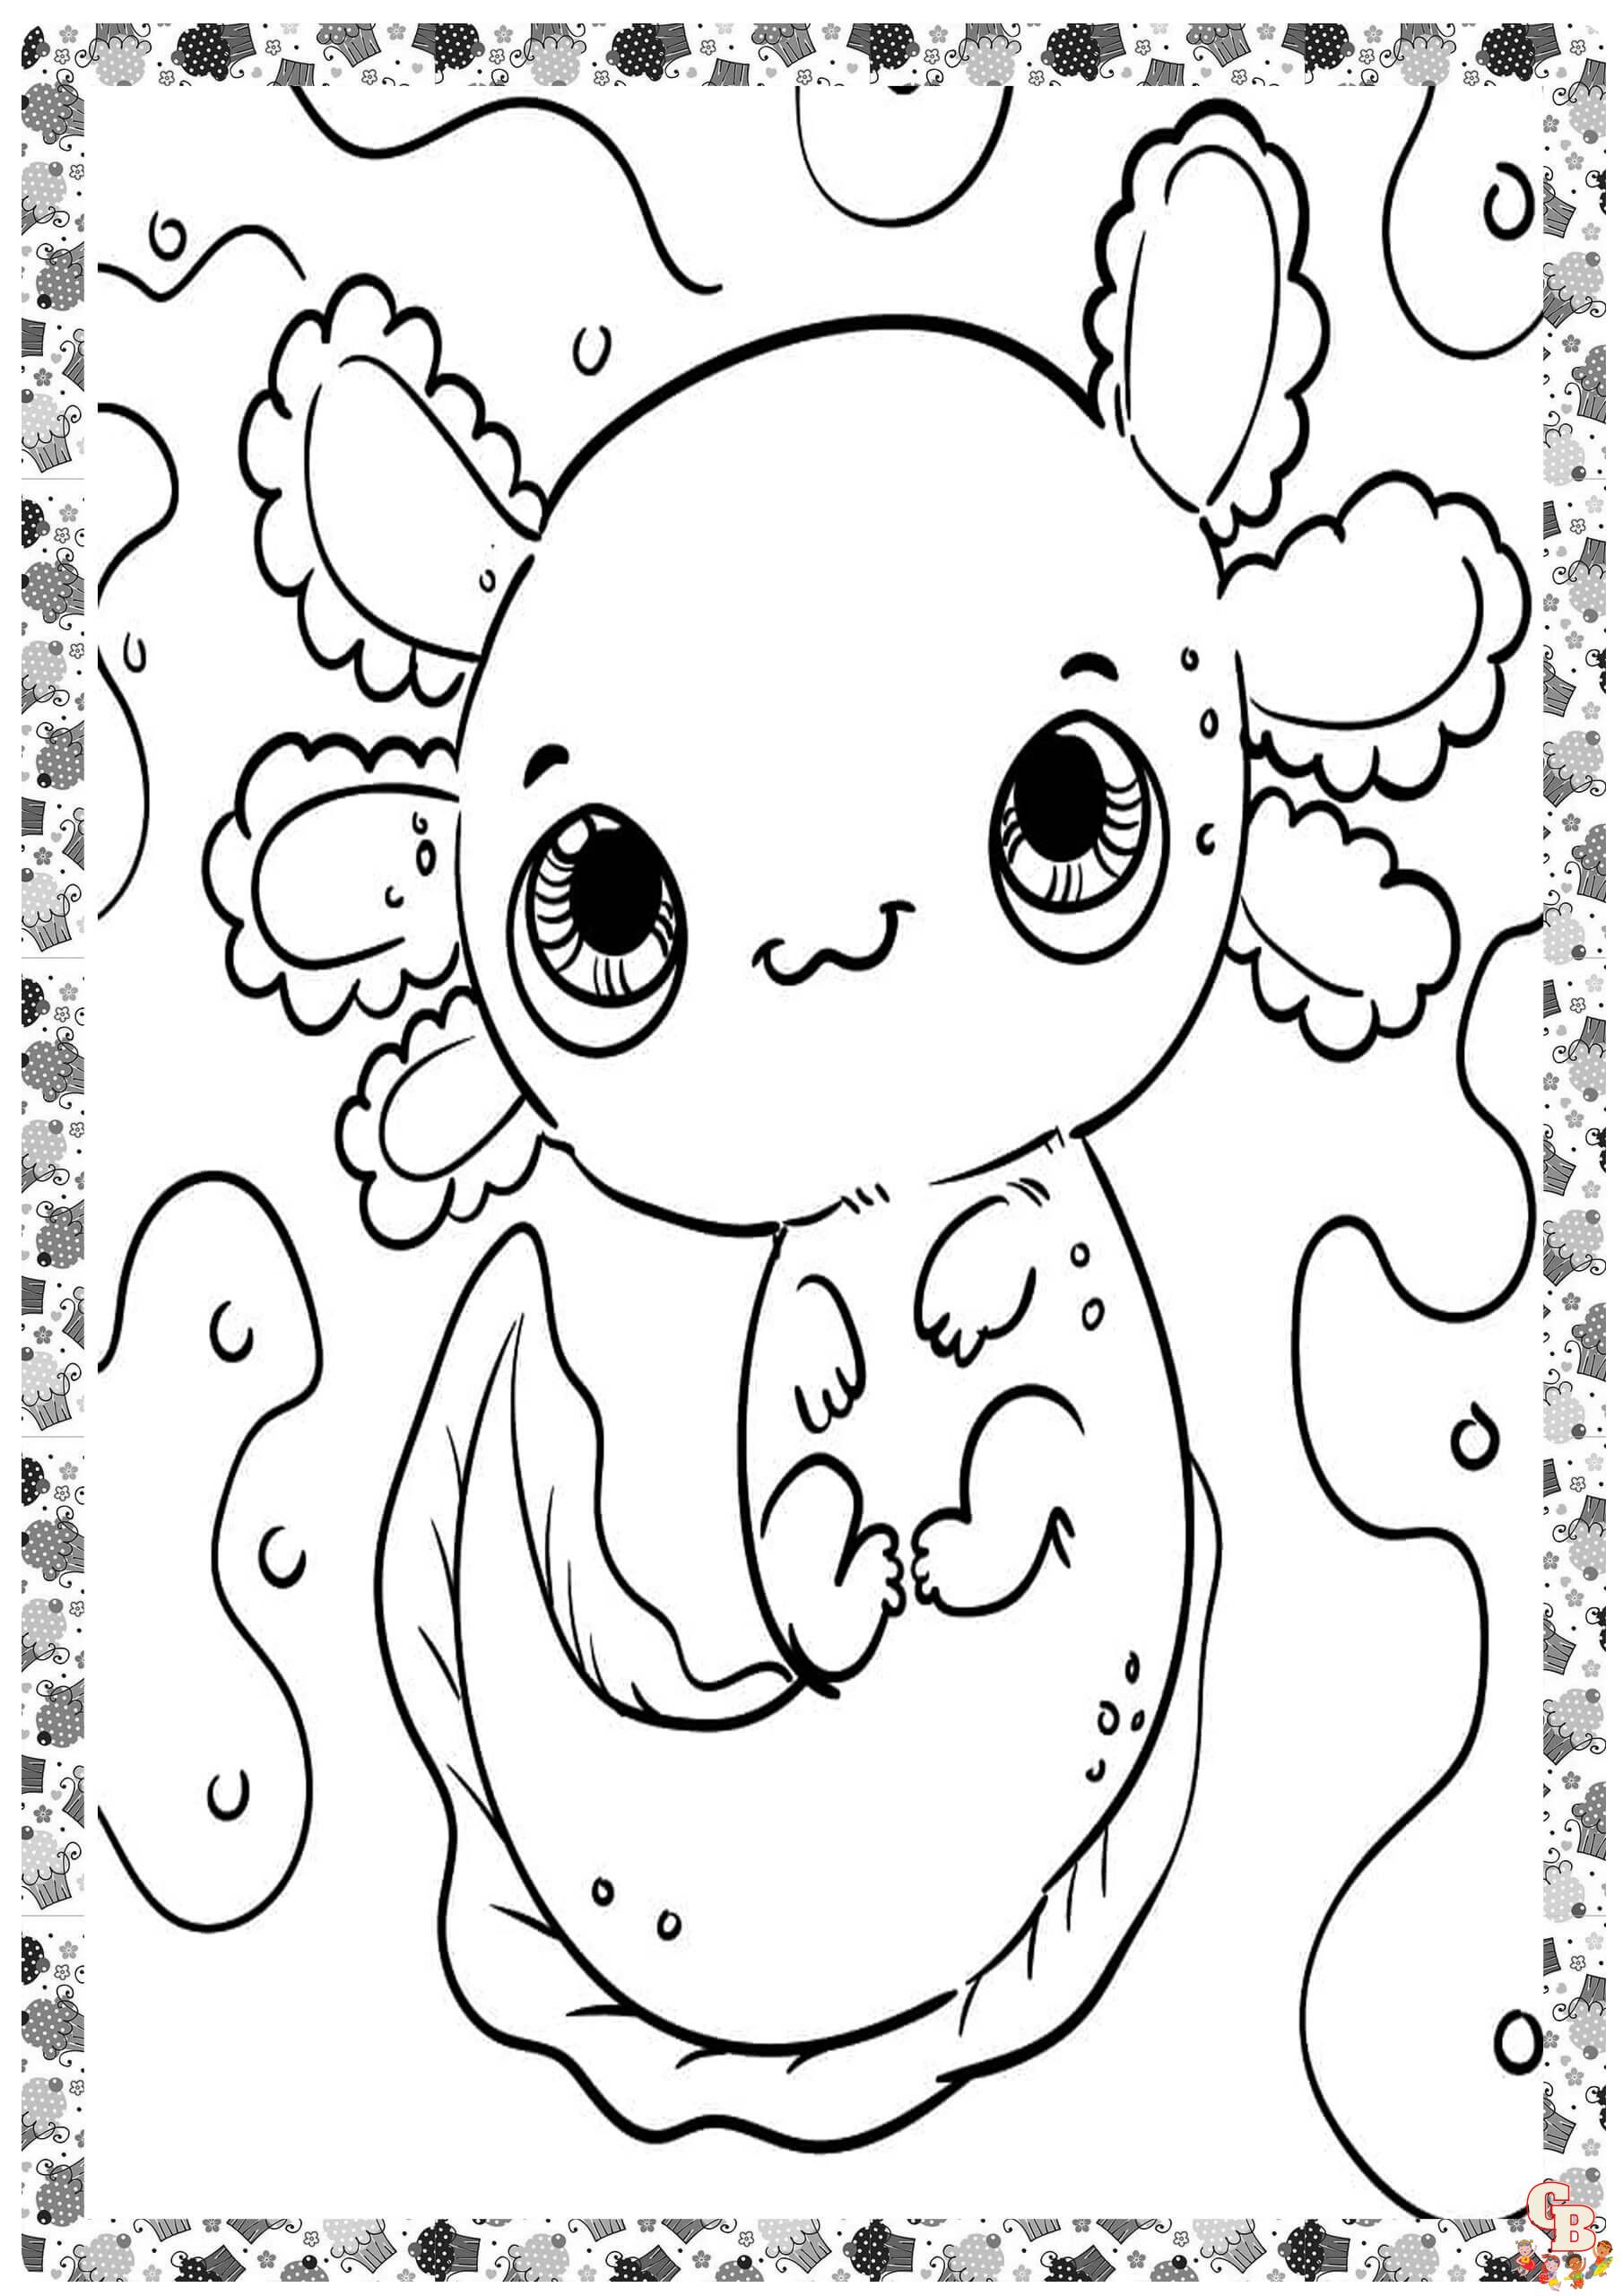 axolotl coloring pages 4